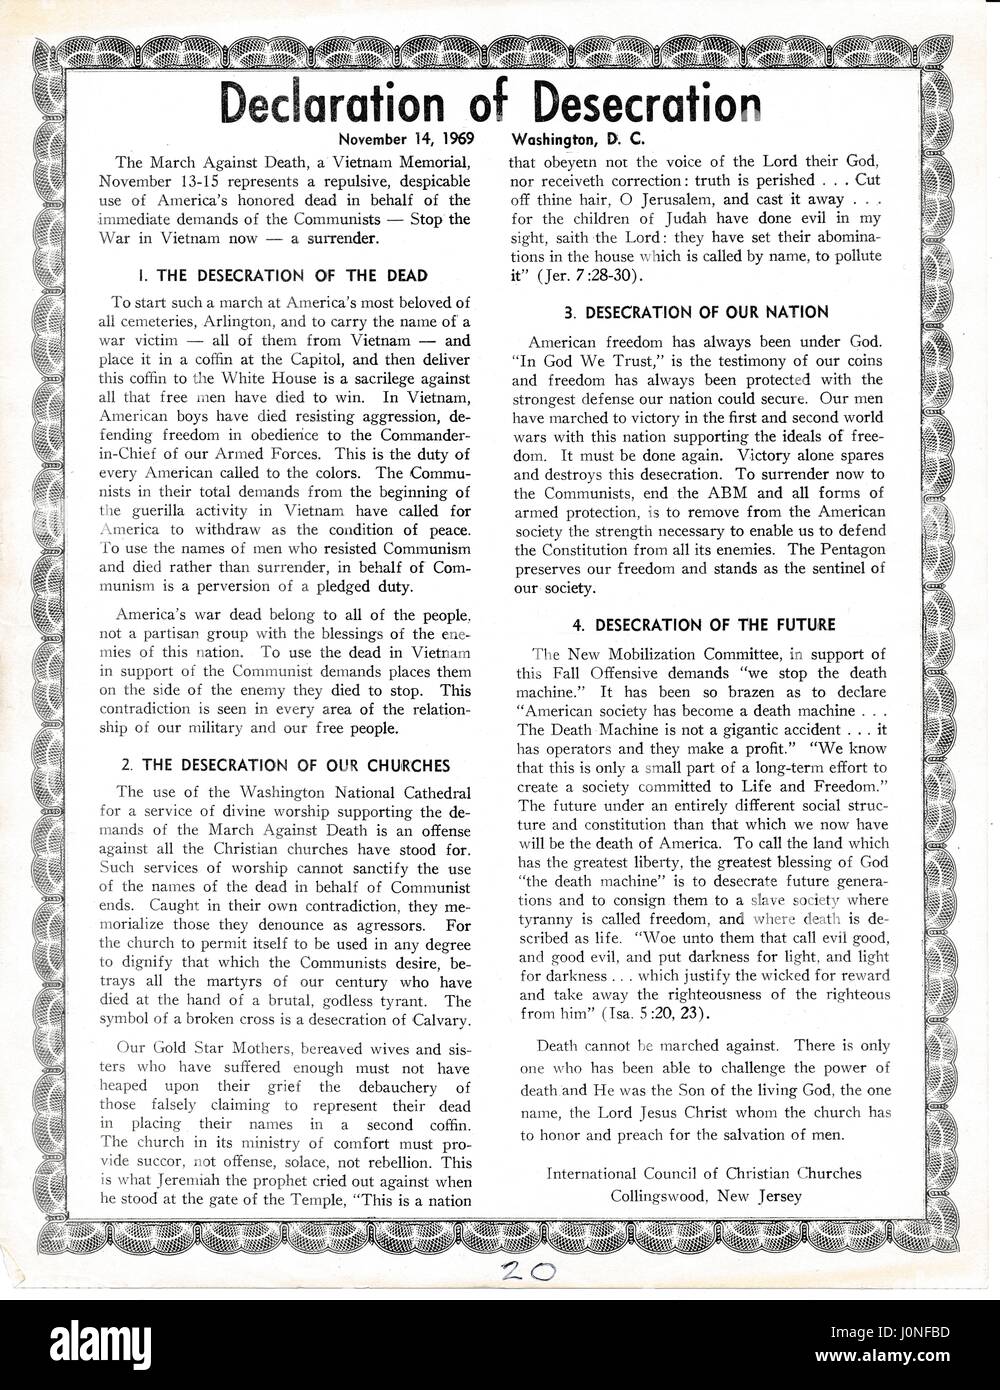 A Vietnam War era leaflet from the International Council of Christian Churches titled 'Declaration of Desecration' advocating that the March Against Death and other Vietnam War protests are both anti-Christian and anti-American featuring religious justification for their viewpoint, Collingswood, NJ, 1967. Stock Photo